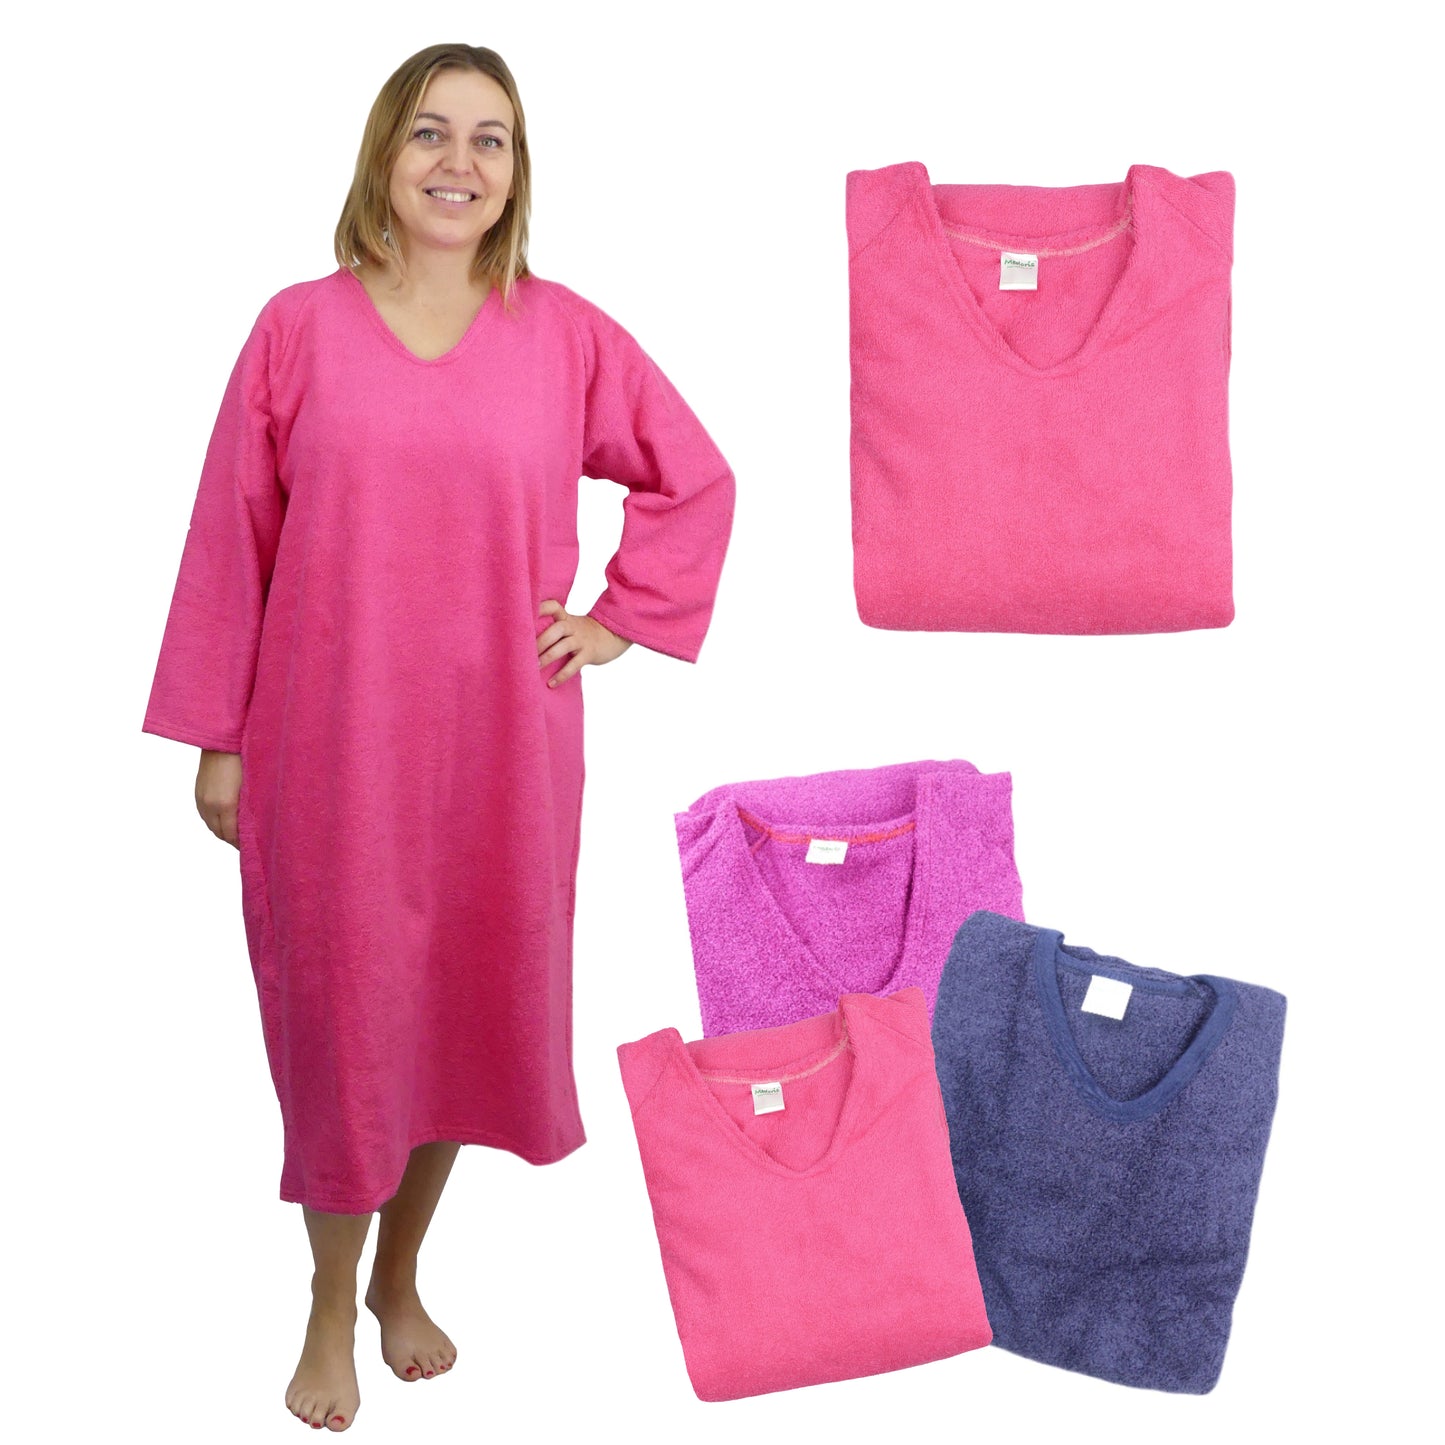 Unisex Adaptive Clothing: Over-The-Head Dri-Me Towelling Shower Robe - M145